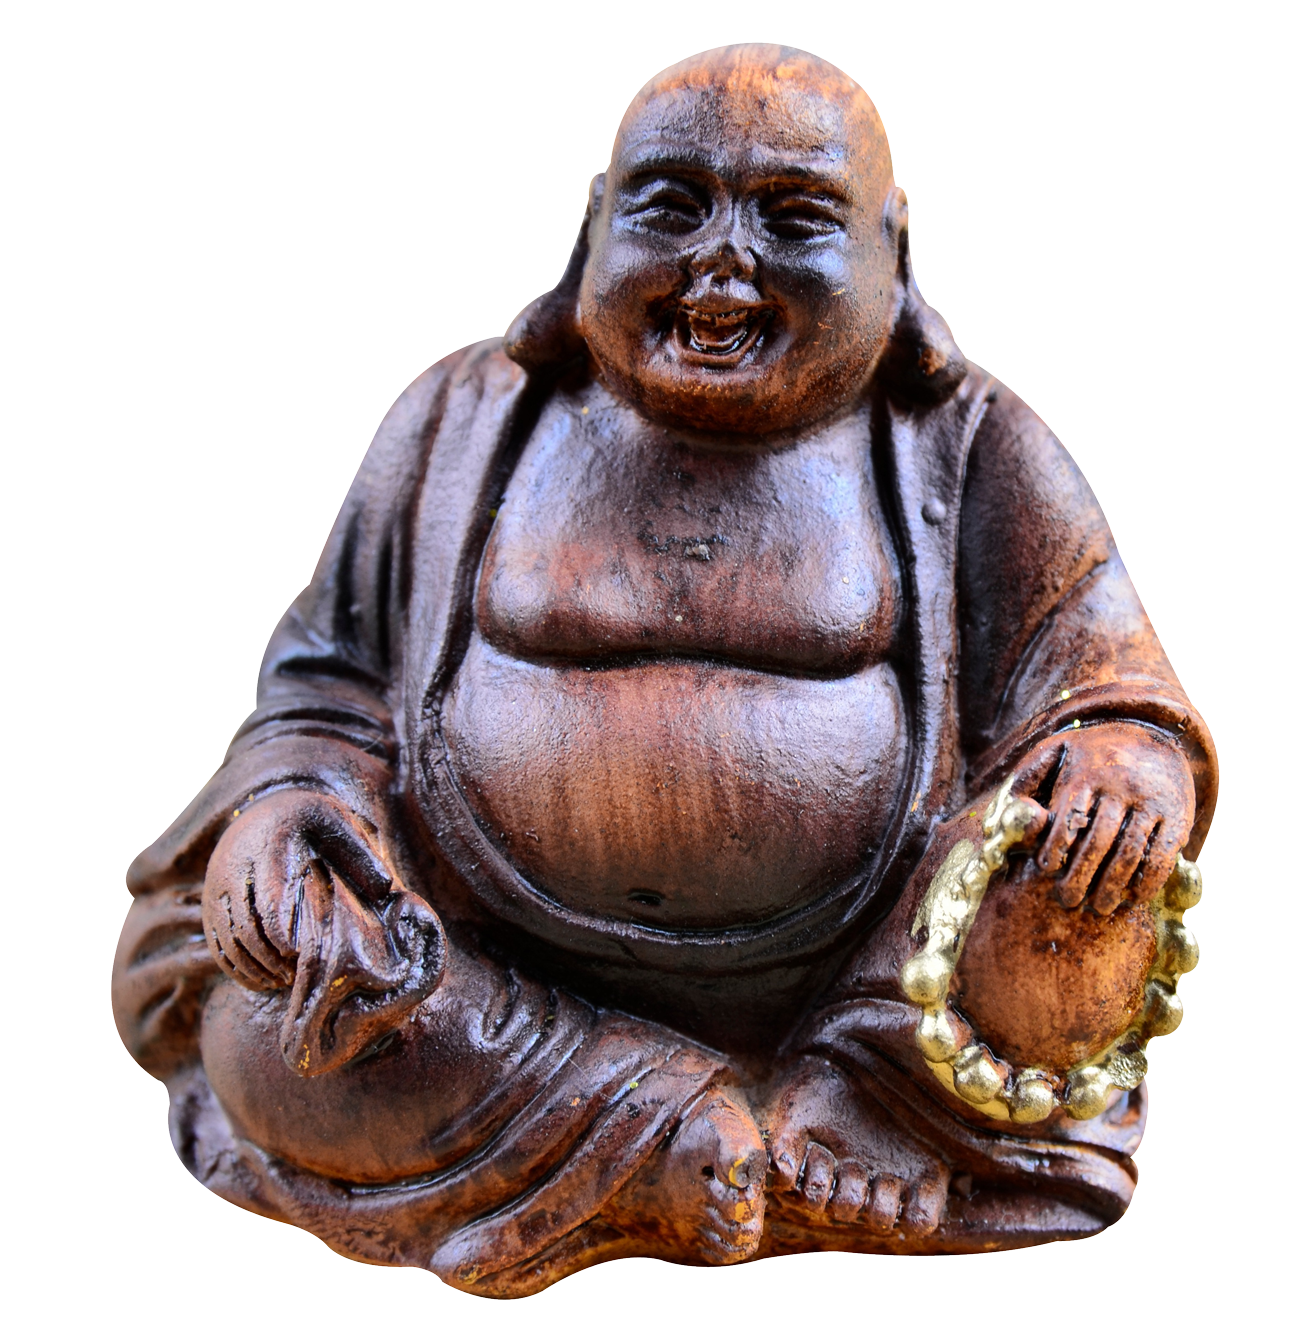 A Statue Of A Smiling Buddha